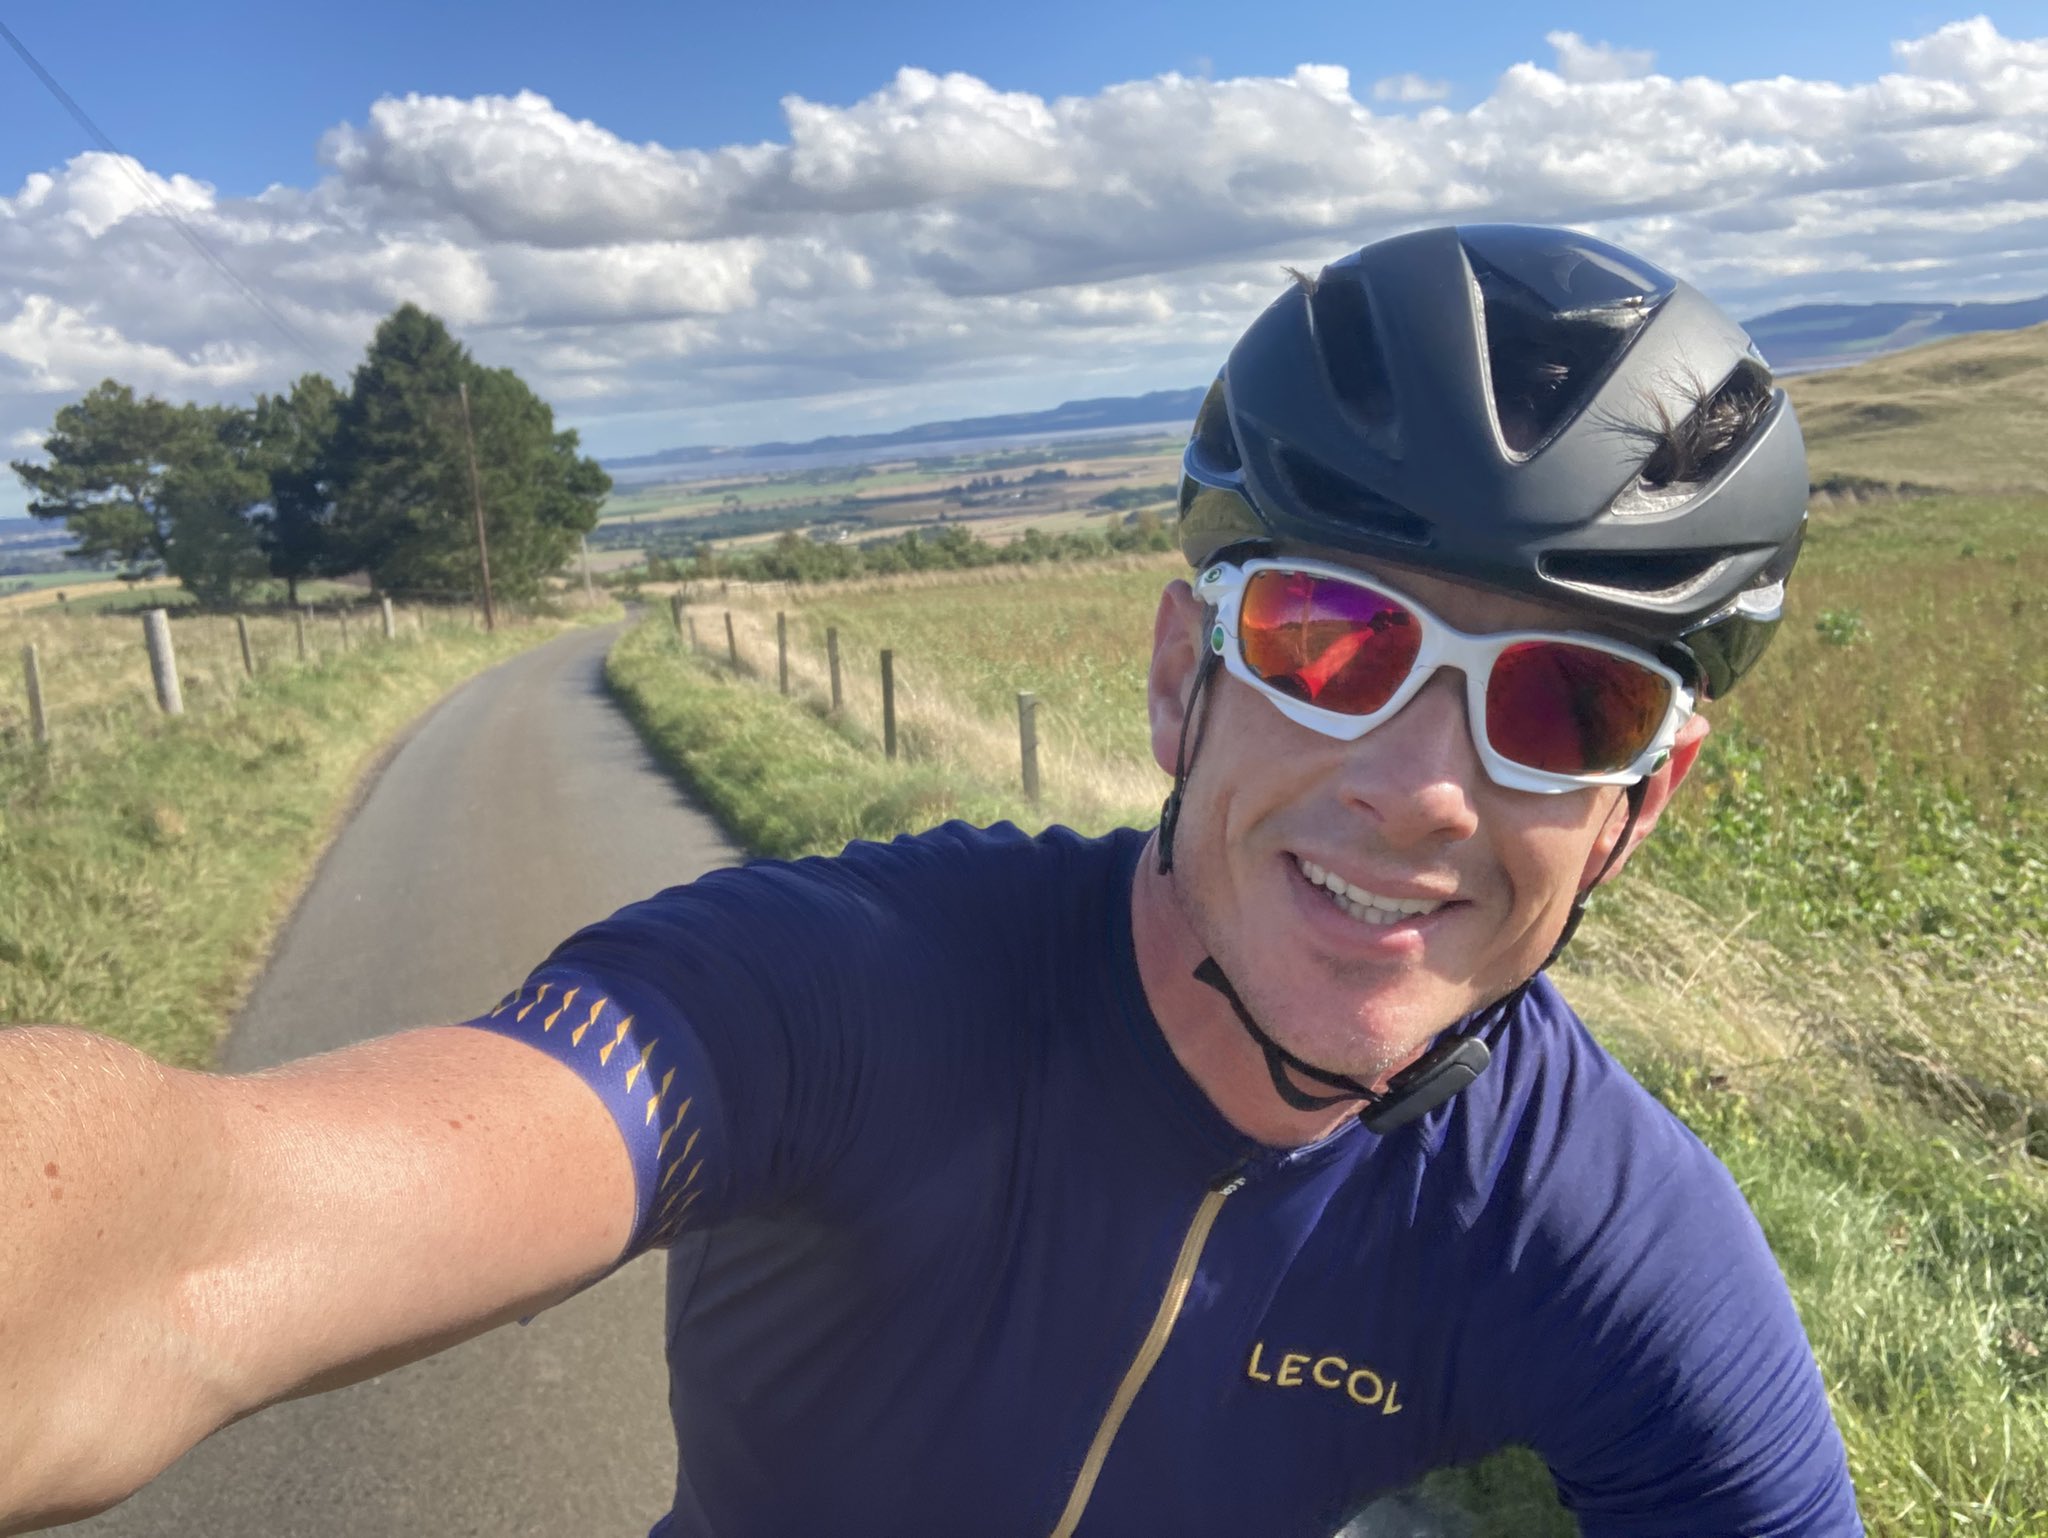 Caley Fretz on Twitter: "End of an era and the untimely demise of an icon: Geraint  Thomas has to wear SunGod glasses next year. No more Oakley Racing Jackets.  "All riders will